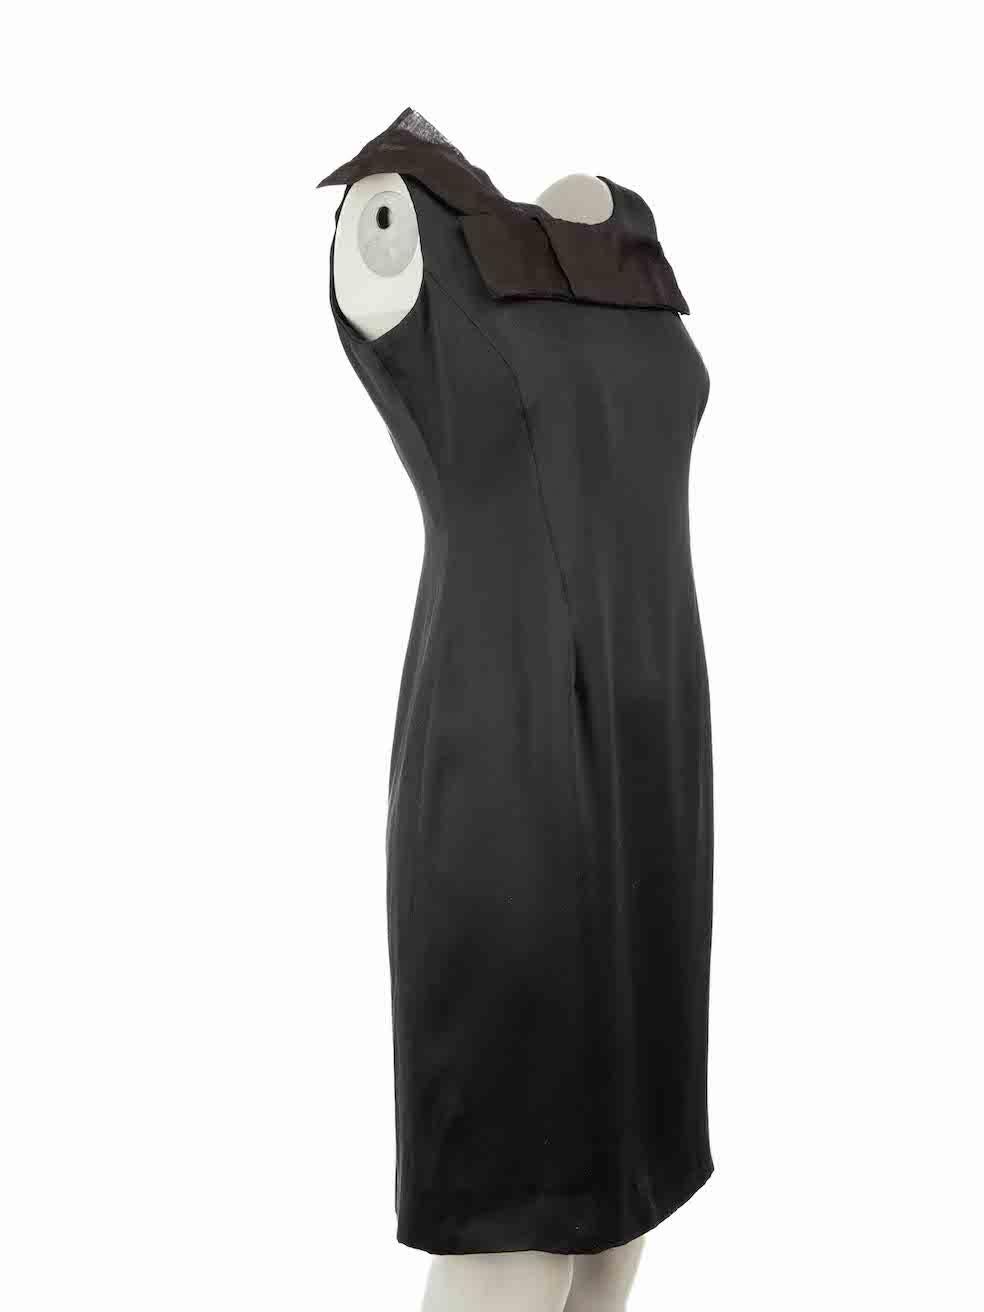 CONDITION is Very good. Hardly any visible wear to dress is evident on this used Giorgio Armani designer resale item.
 
 Details
 Black
 Silk
 Dress
 Figure hugging fit
 Sleeveless
 Round neck
 Mini
 Front bow detail
 Back zip fastening
 
 Made in